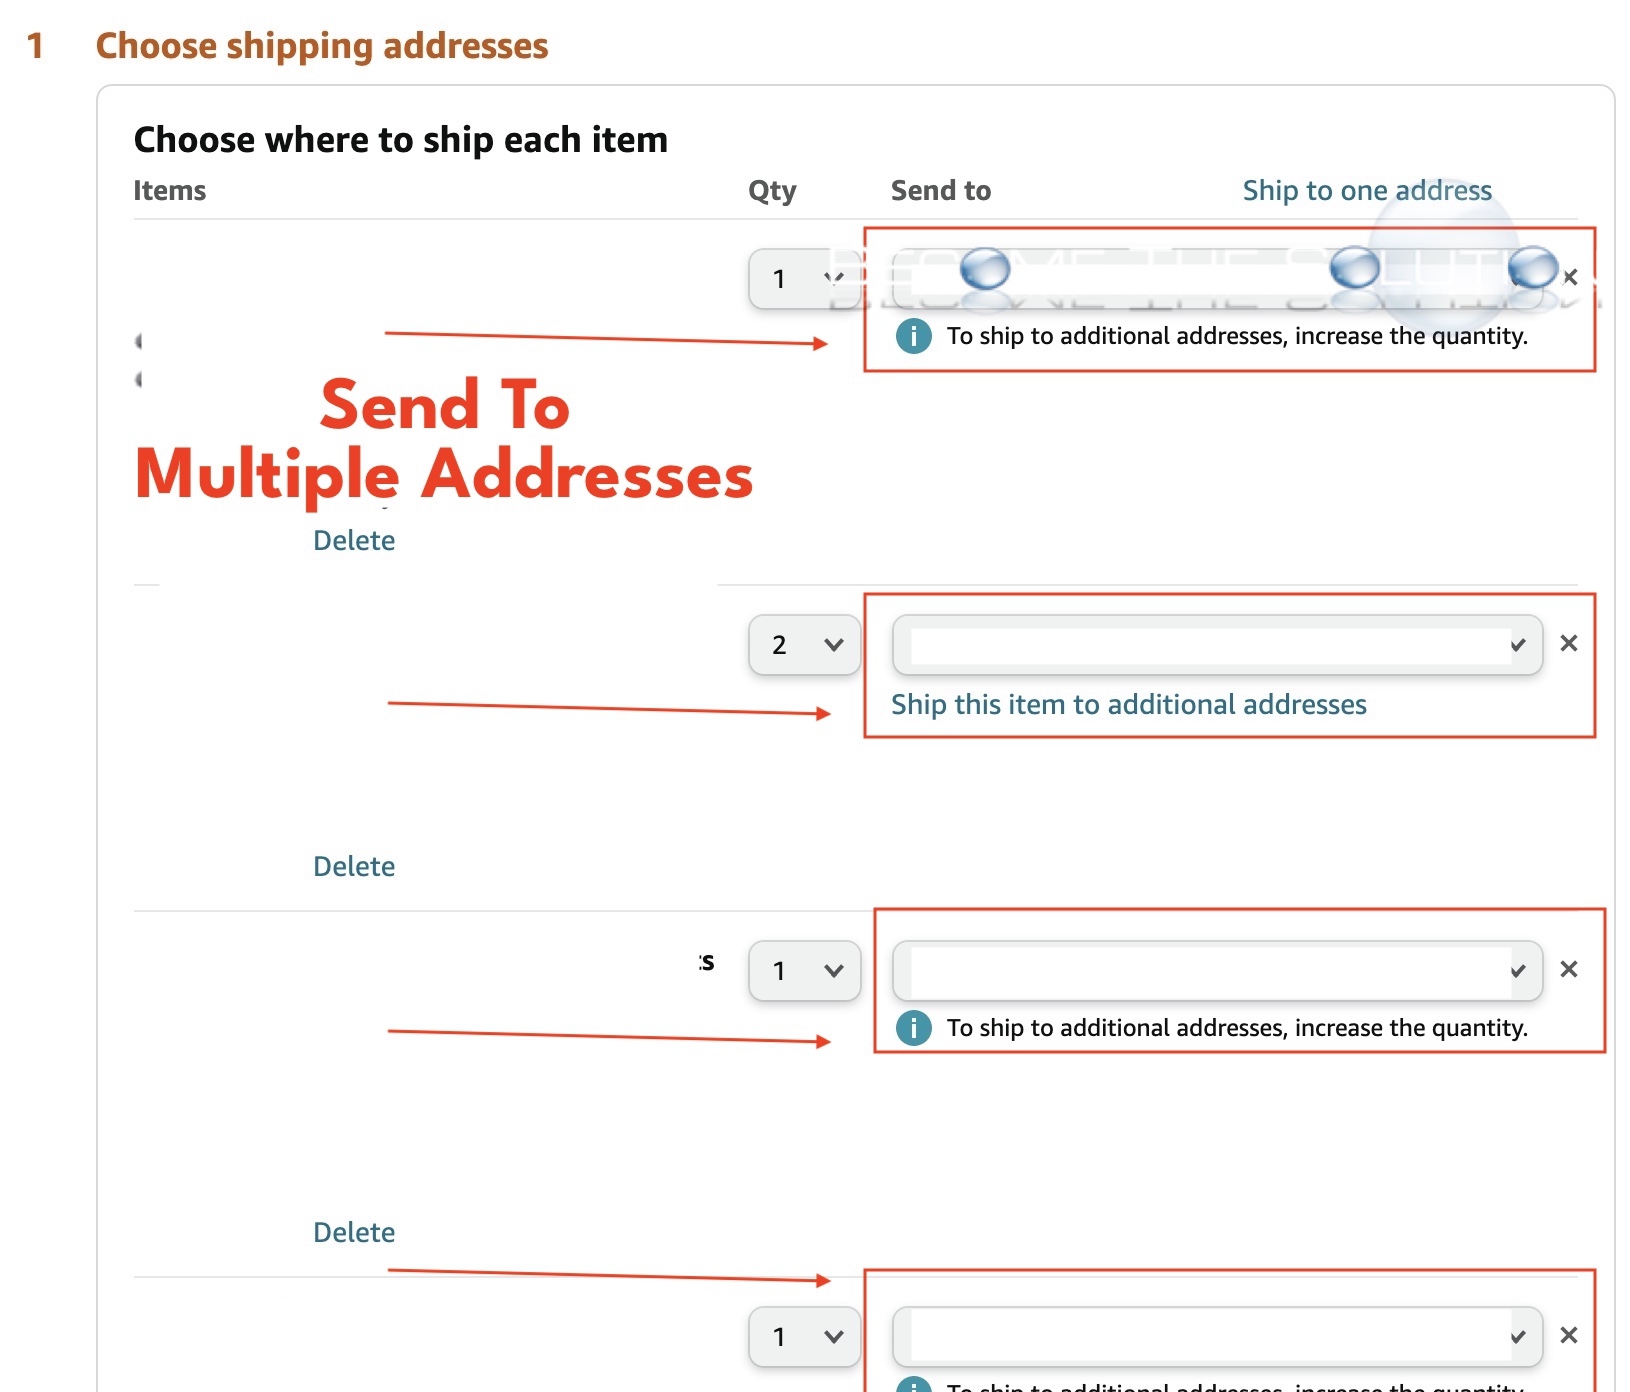 How to ship to multiple addresses on Amazon